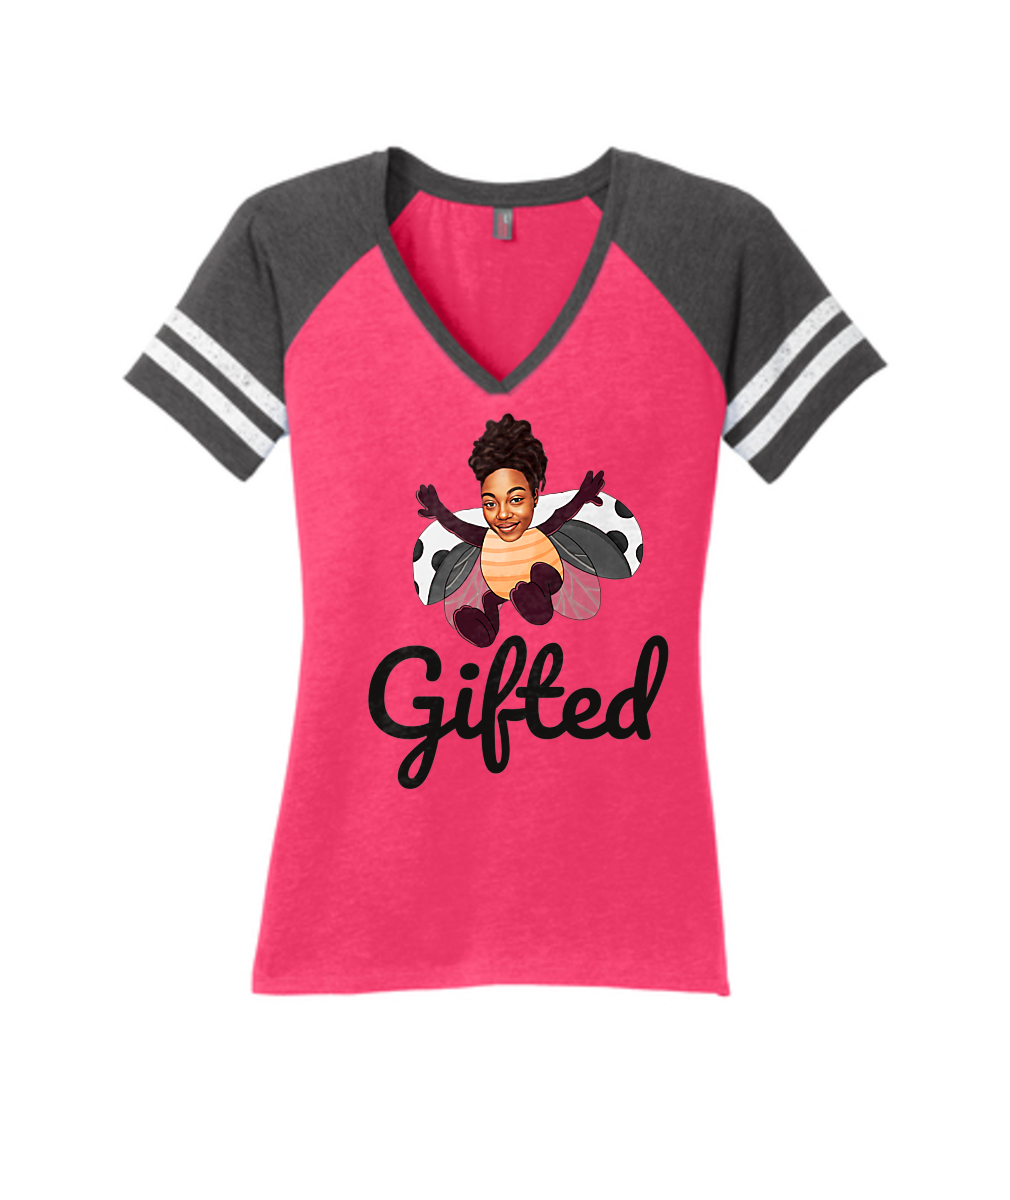 Gifted by Brit Women's V-Neck or Similar